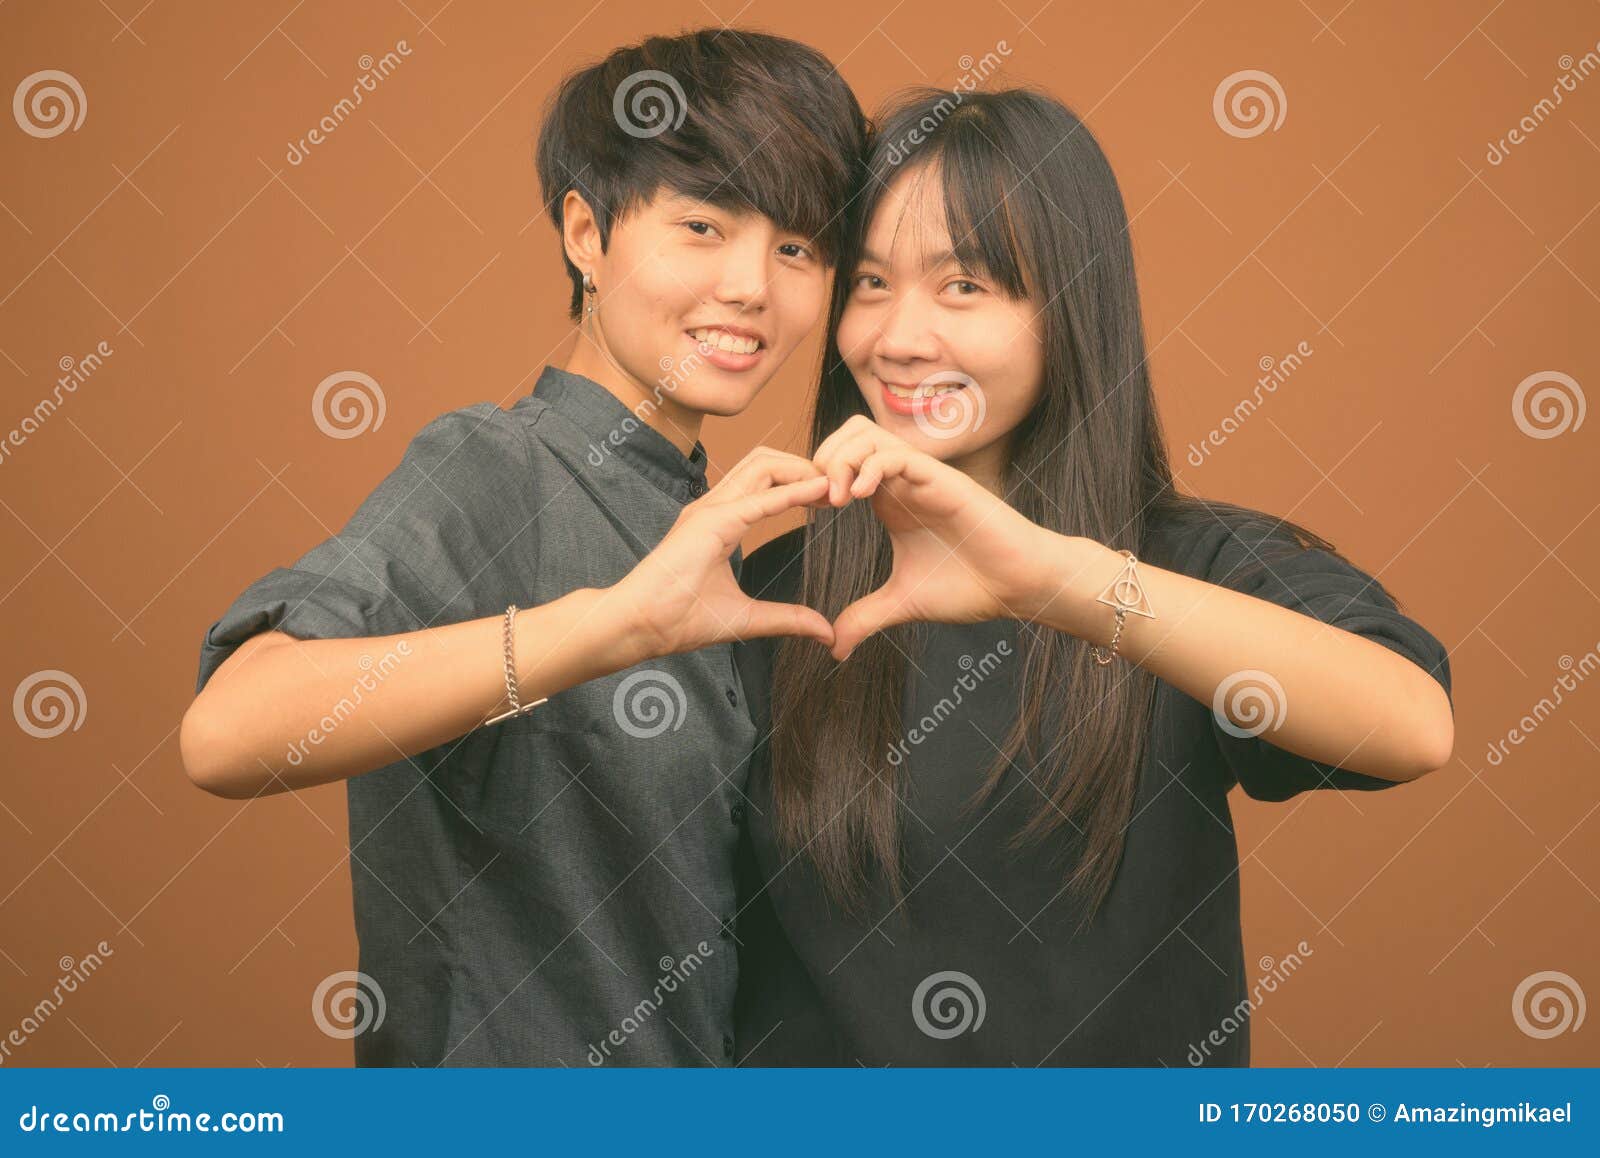 Young Asian Lesbian Couple Together And In Love Against Br